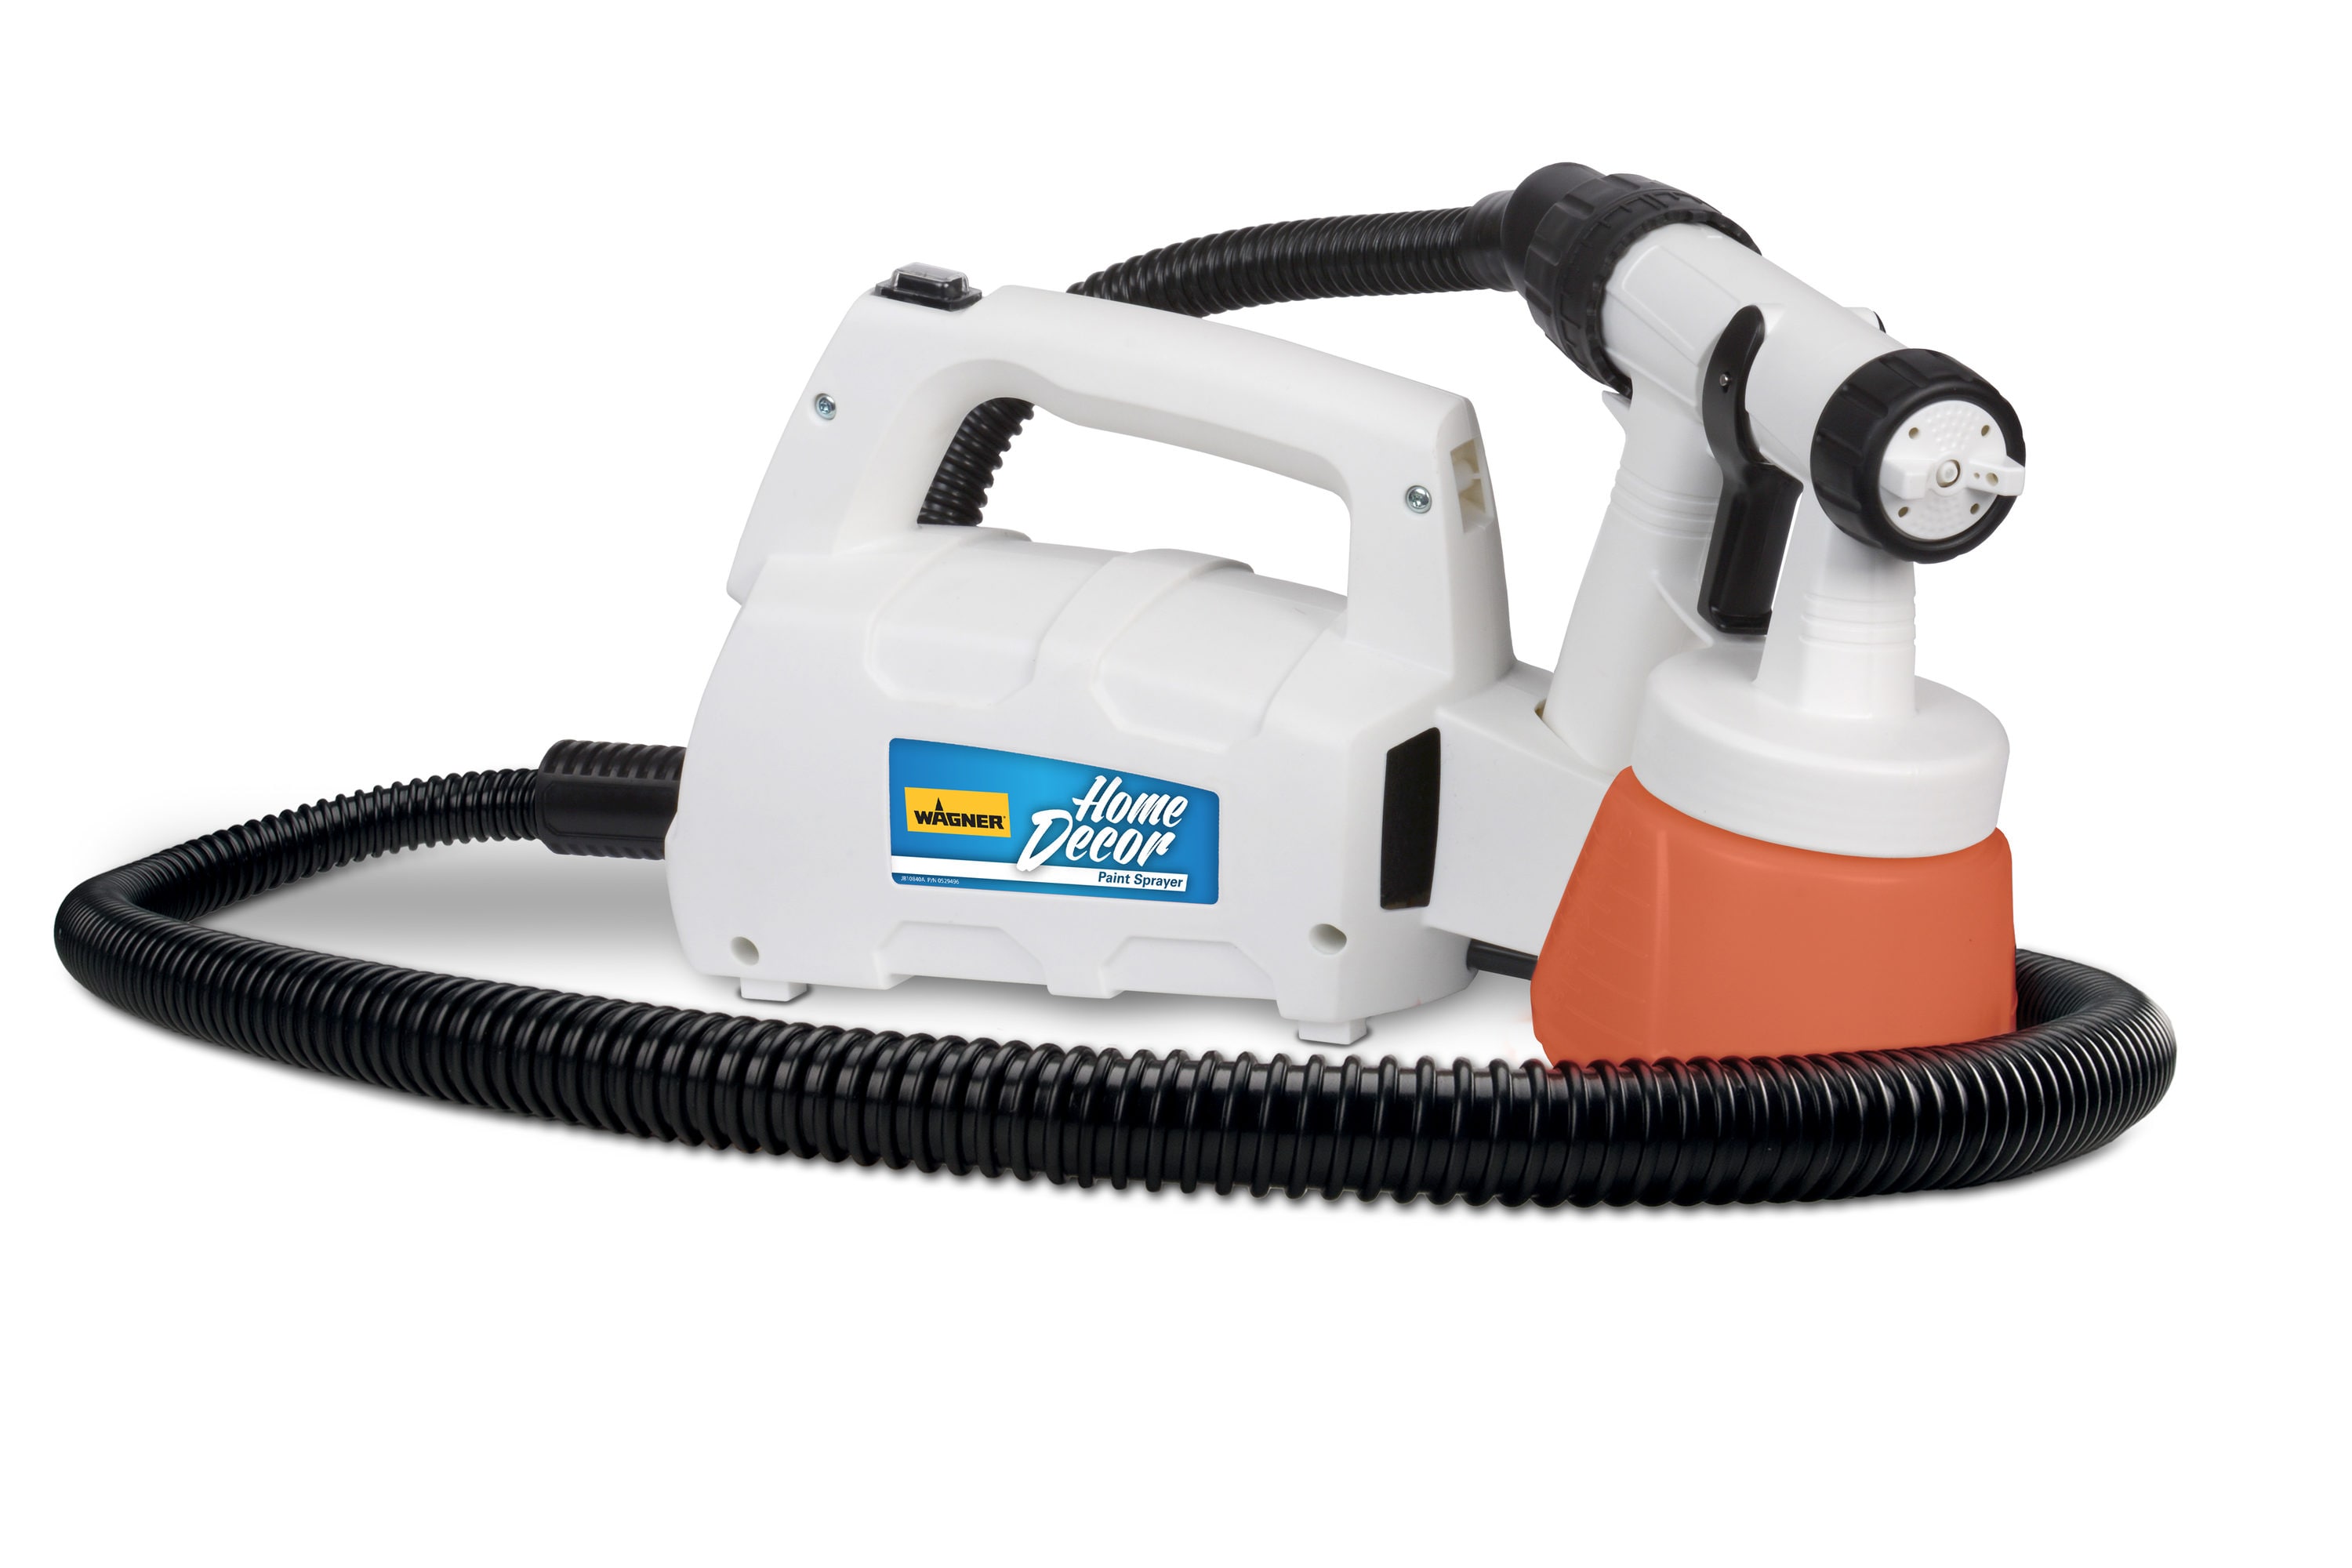 Wagner Opti-stain Plus Corded Electric Handheld HVLP Paint Sprayer  (Compatible with Stains) in the HVLP Paint Sprayers department at